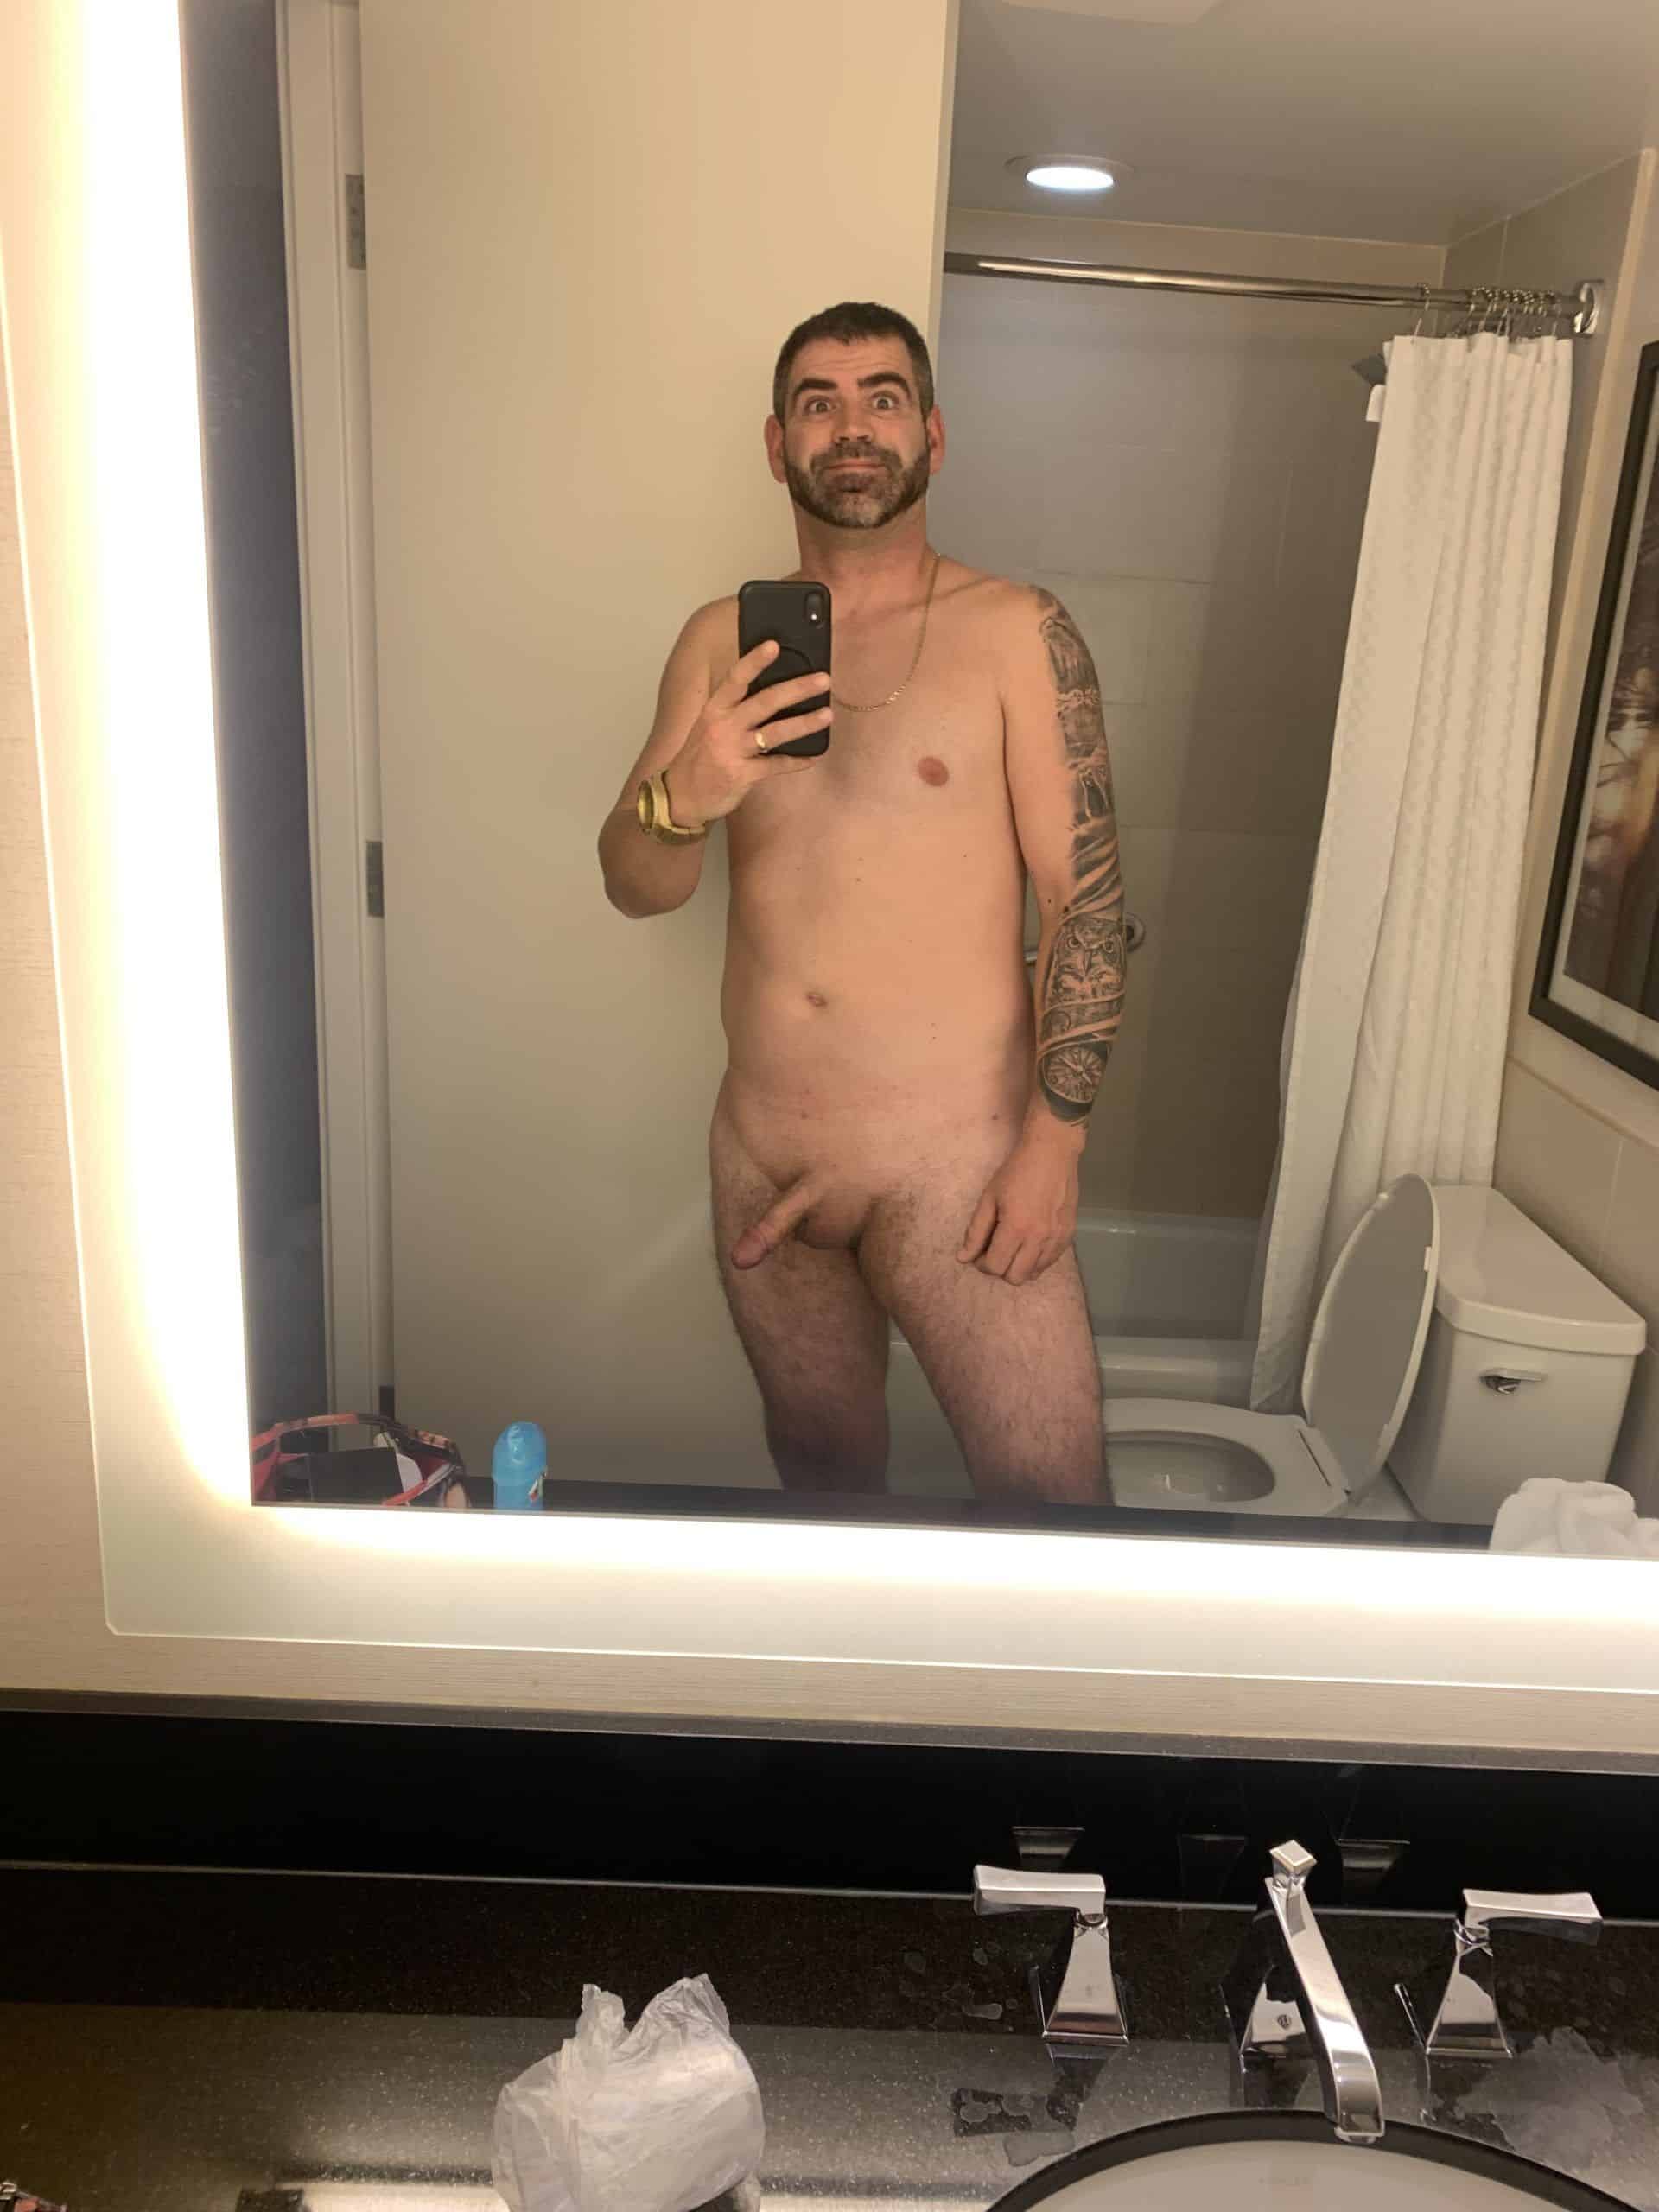 Real Amateurs Dick Flash Pics  : Just a naked picture of me in front of a mirror RobertPaulCrook naked